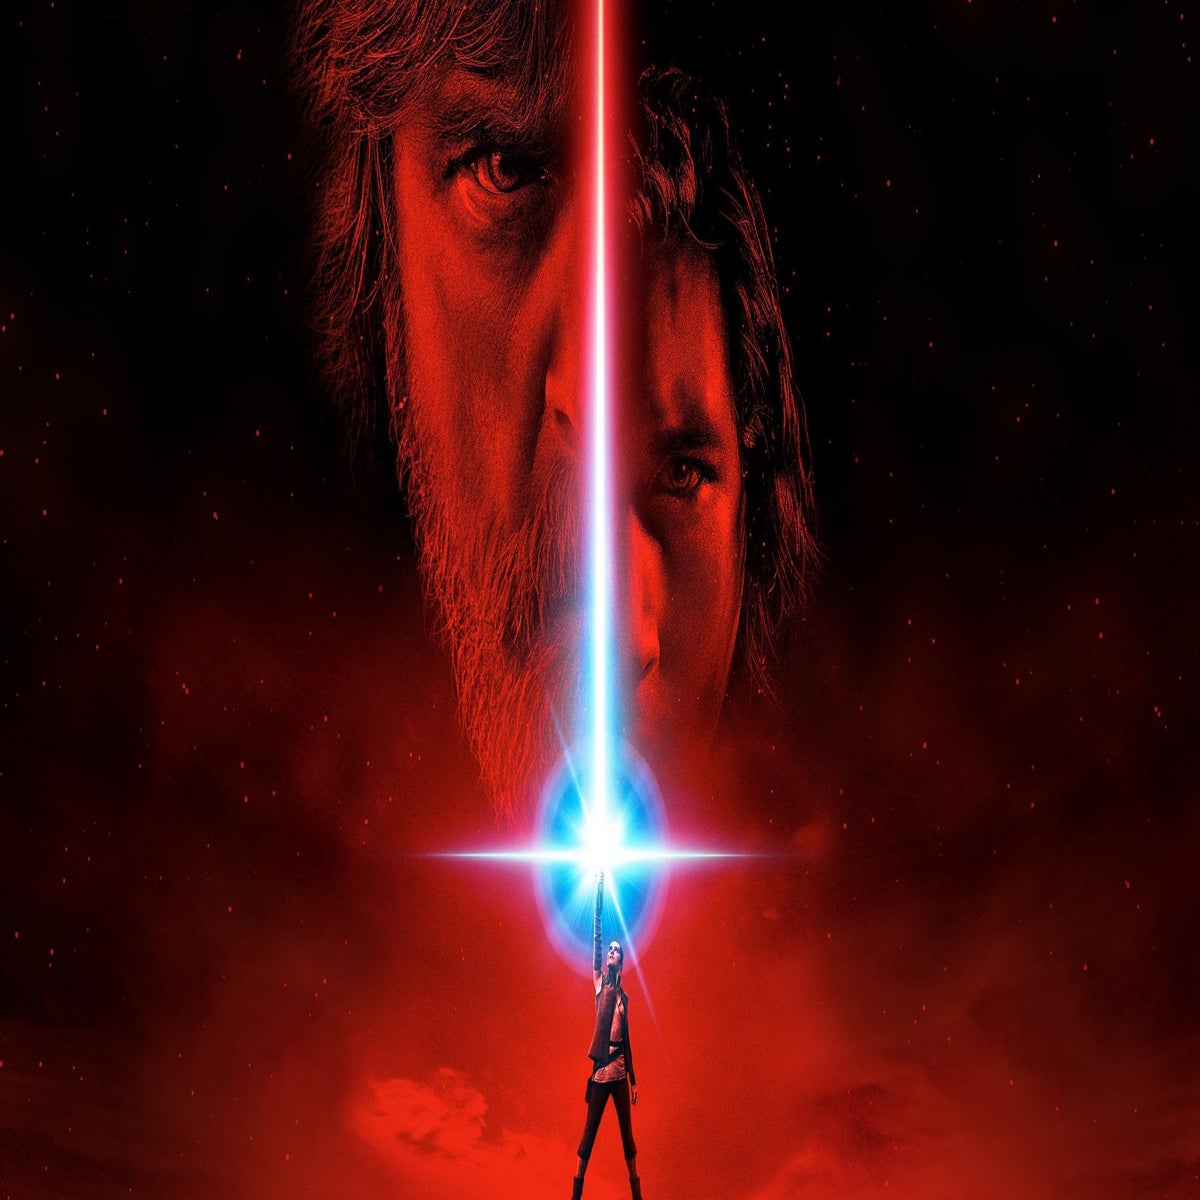 Rotten Tomatoes - The Last Jedi released in theaters five